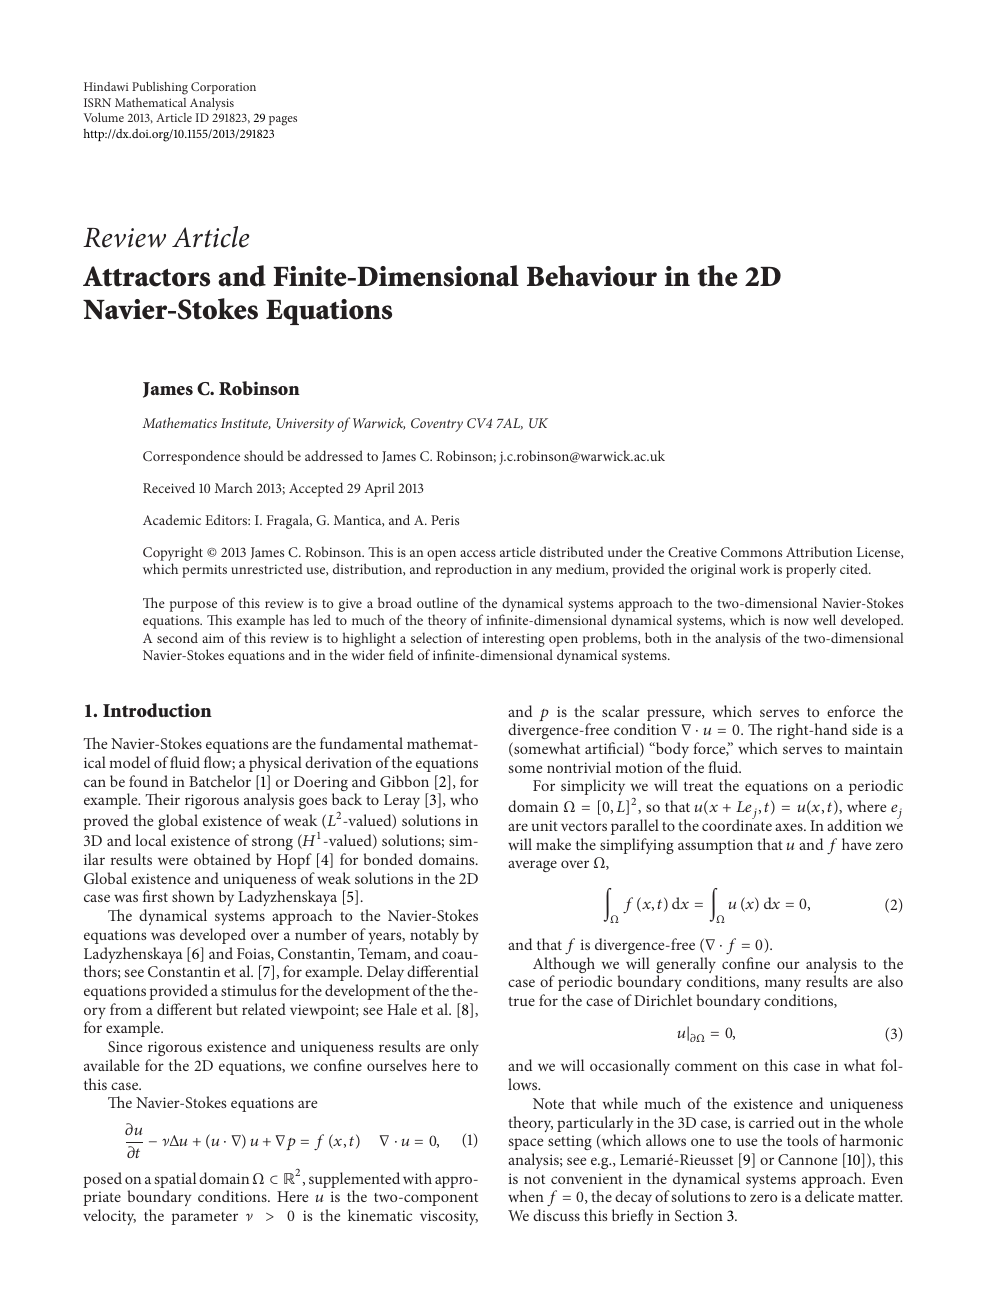 Attractors And Finite Dimensional Behaviour In The 2d Navier Stokes Equations Topic Of Research Paper In Mathematics Download Scholarly Article Pdf And Read For Free On Cyberleninka Open Science Hub